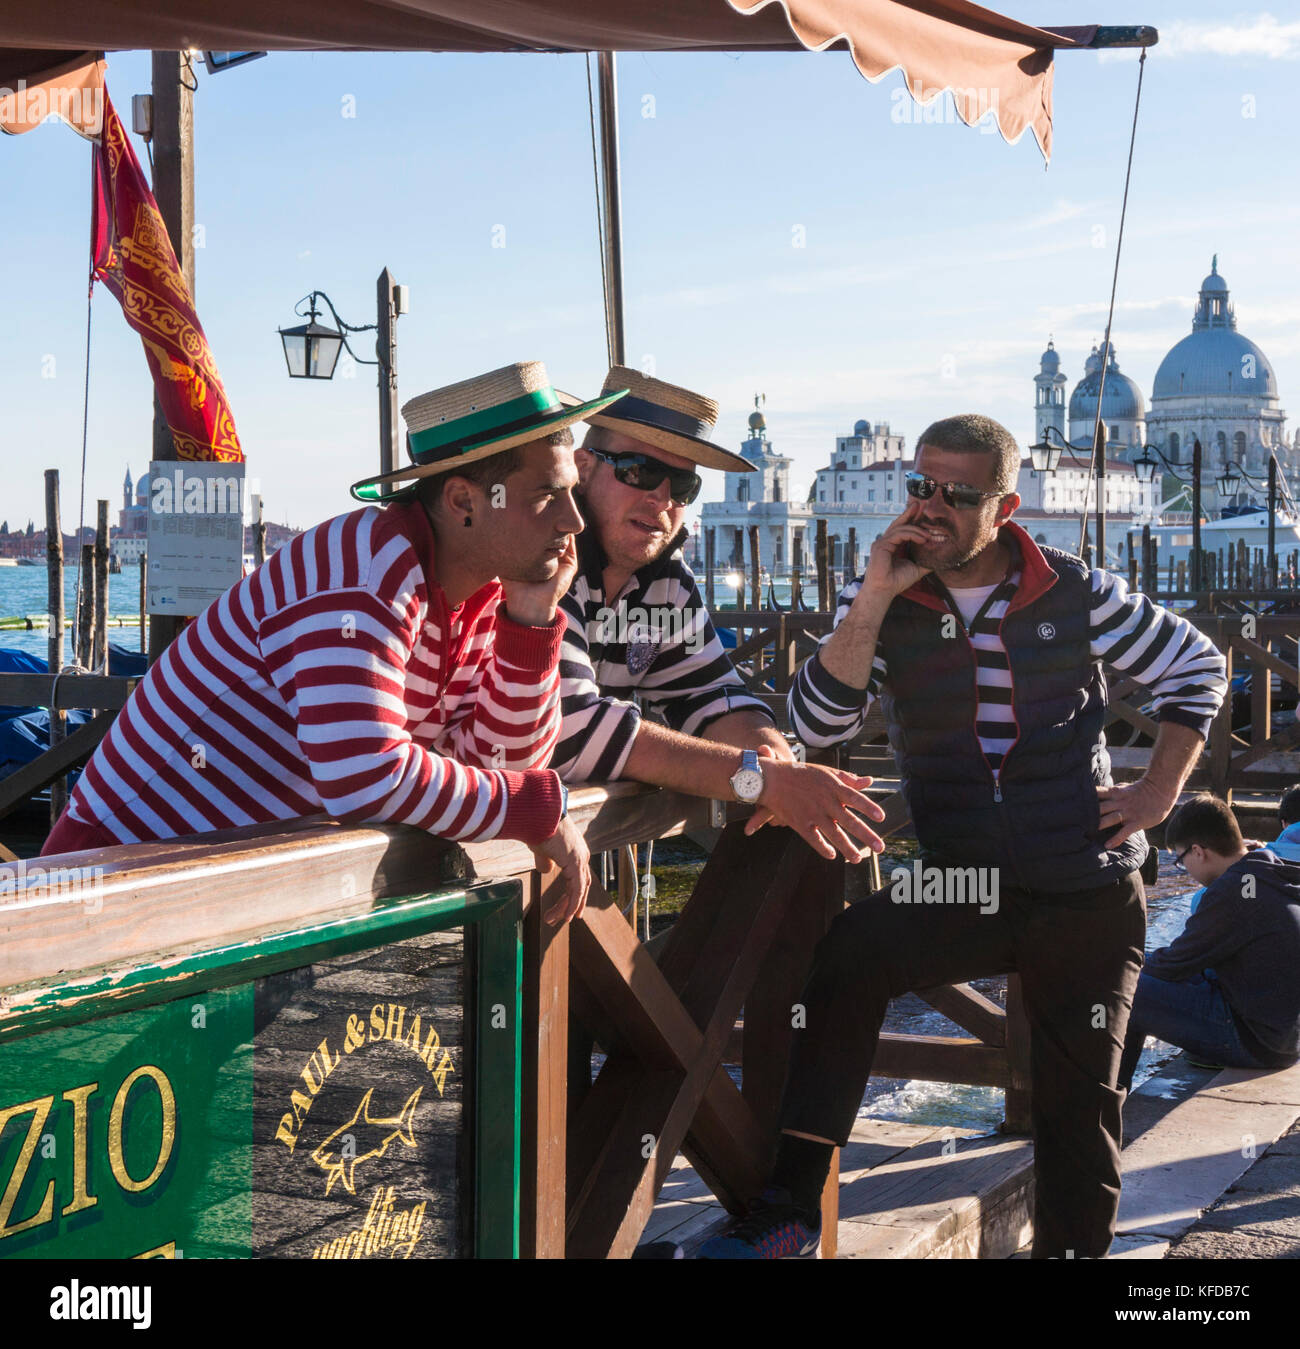 three gondoliers VENICE ITALY VENICE Three gondoliers in traditional shirts waiting at gondola hire station on the Grand canal Venice Italy EU Europe Stock Photo